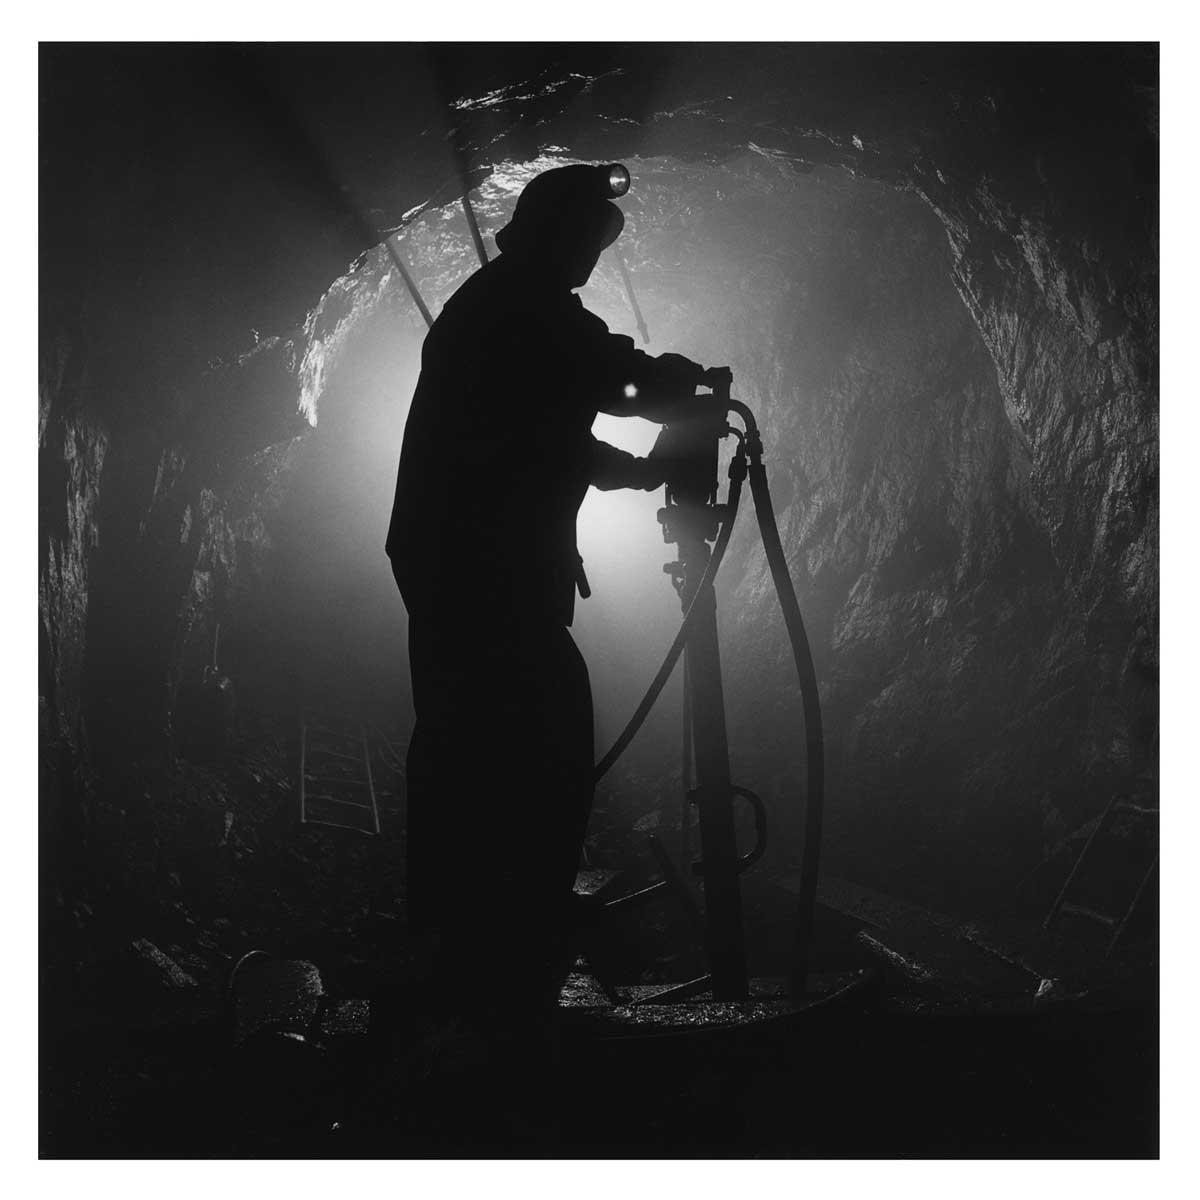 A black and white photo of a backlit minor working underground.